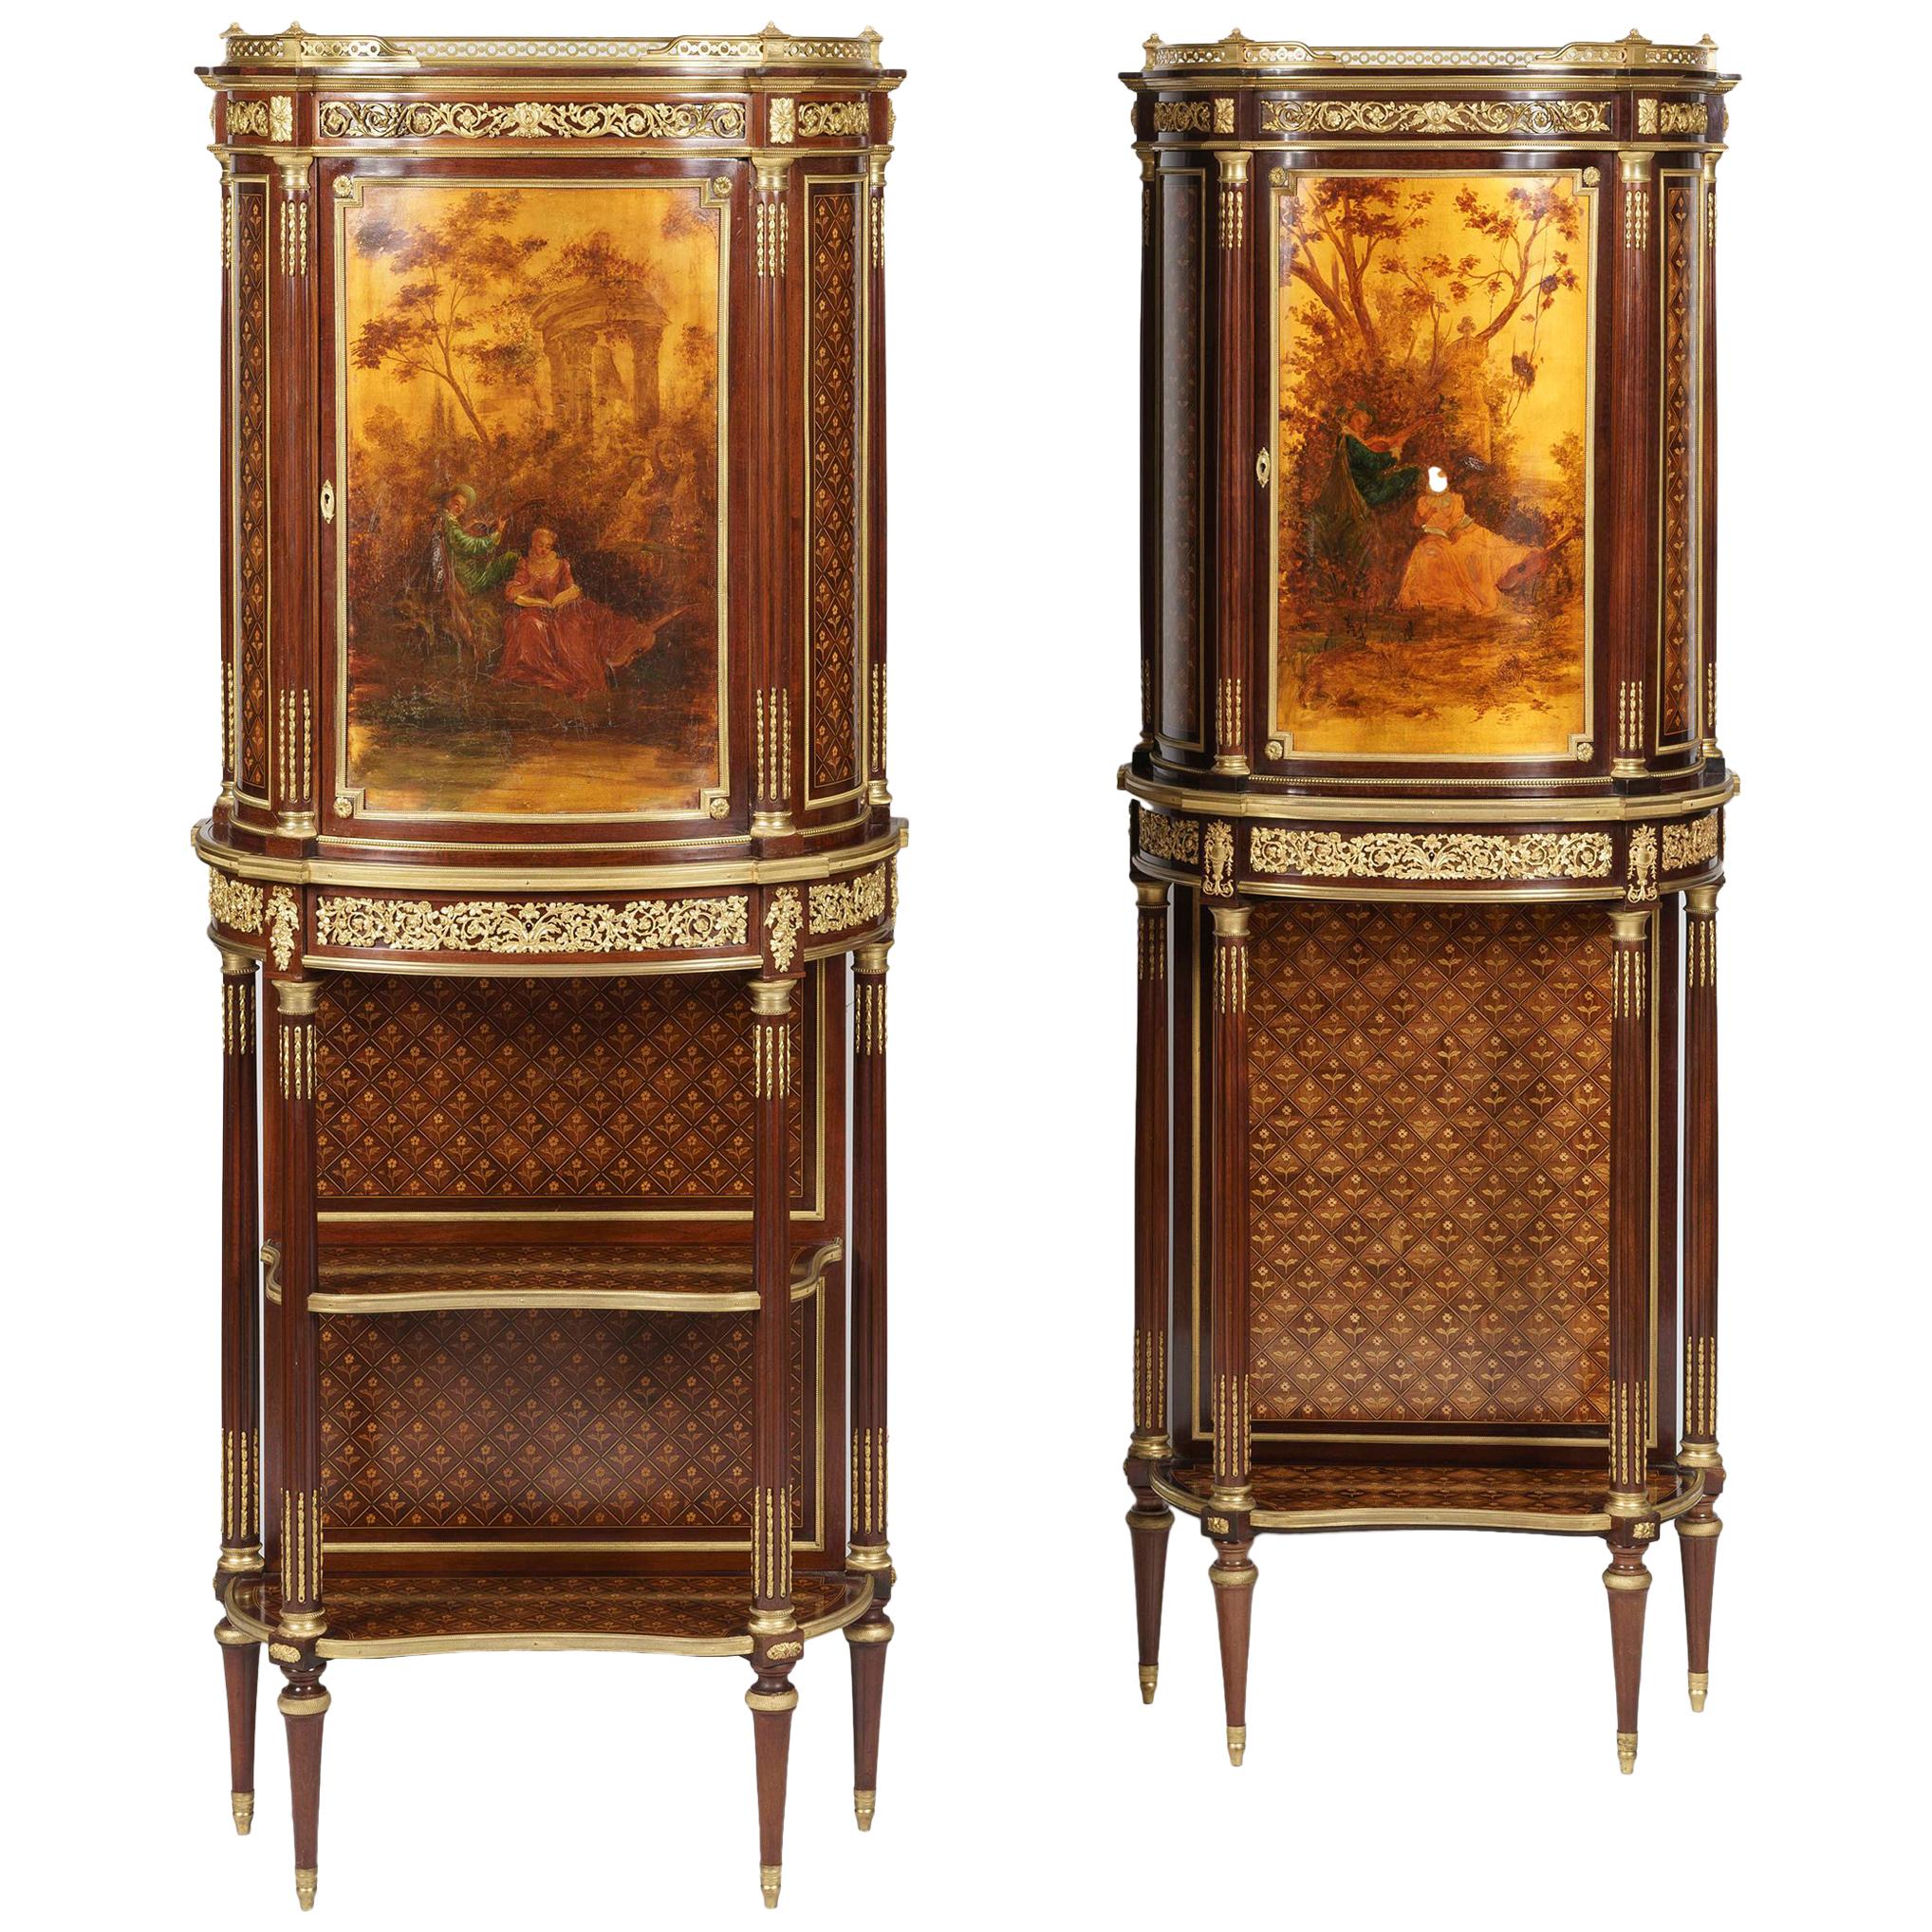 Pair of Napoleon III Side Cabinets with Vernis Martin and Ormolu Decoration